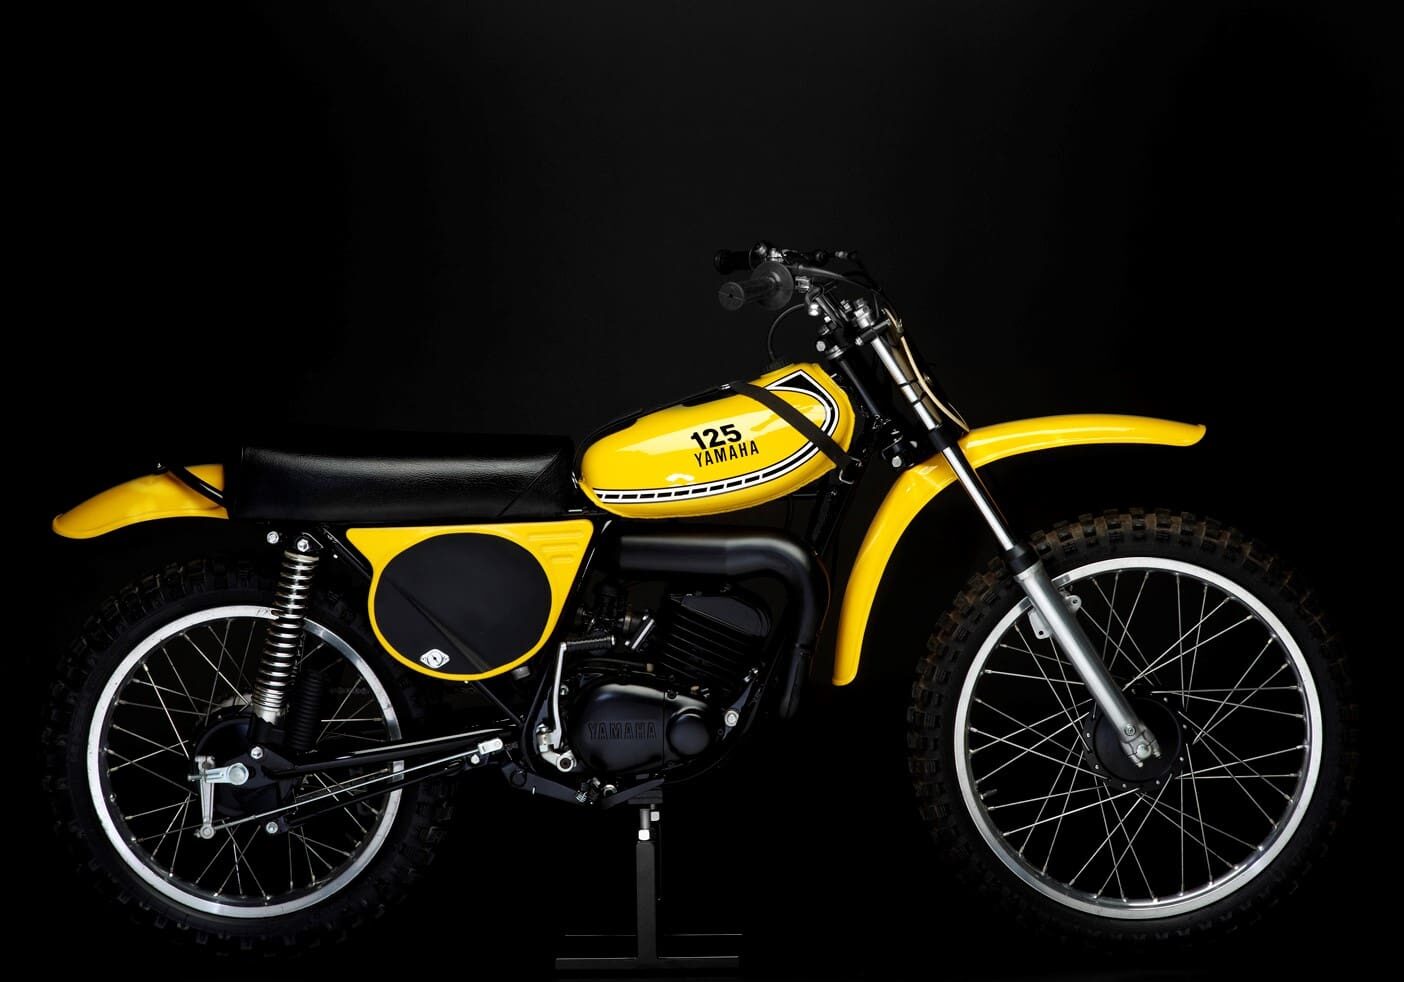 A yellow MX motorbike sits on a black background.